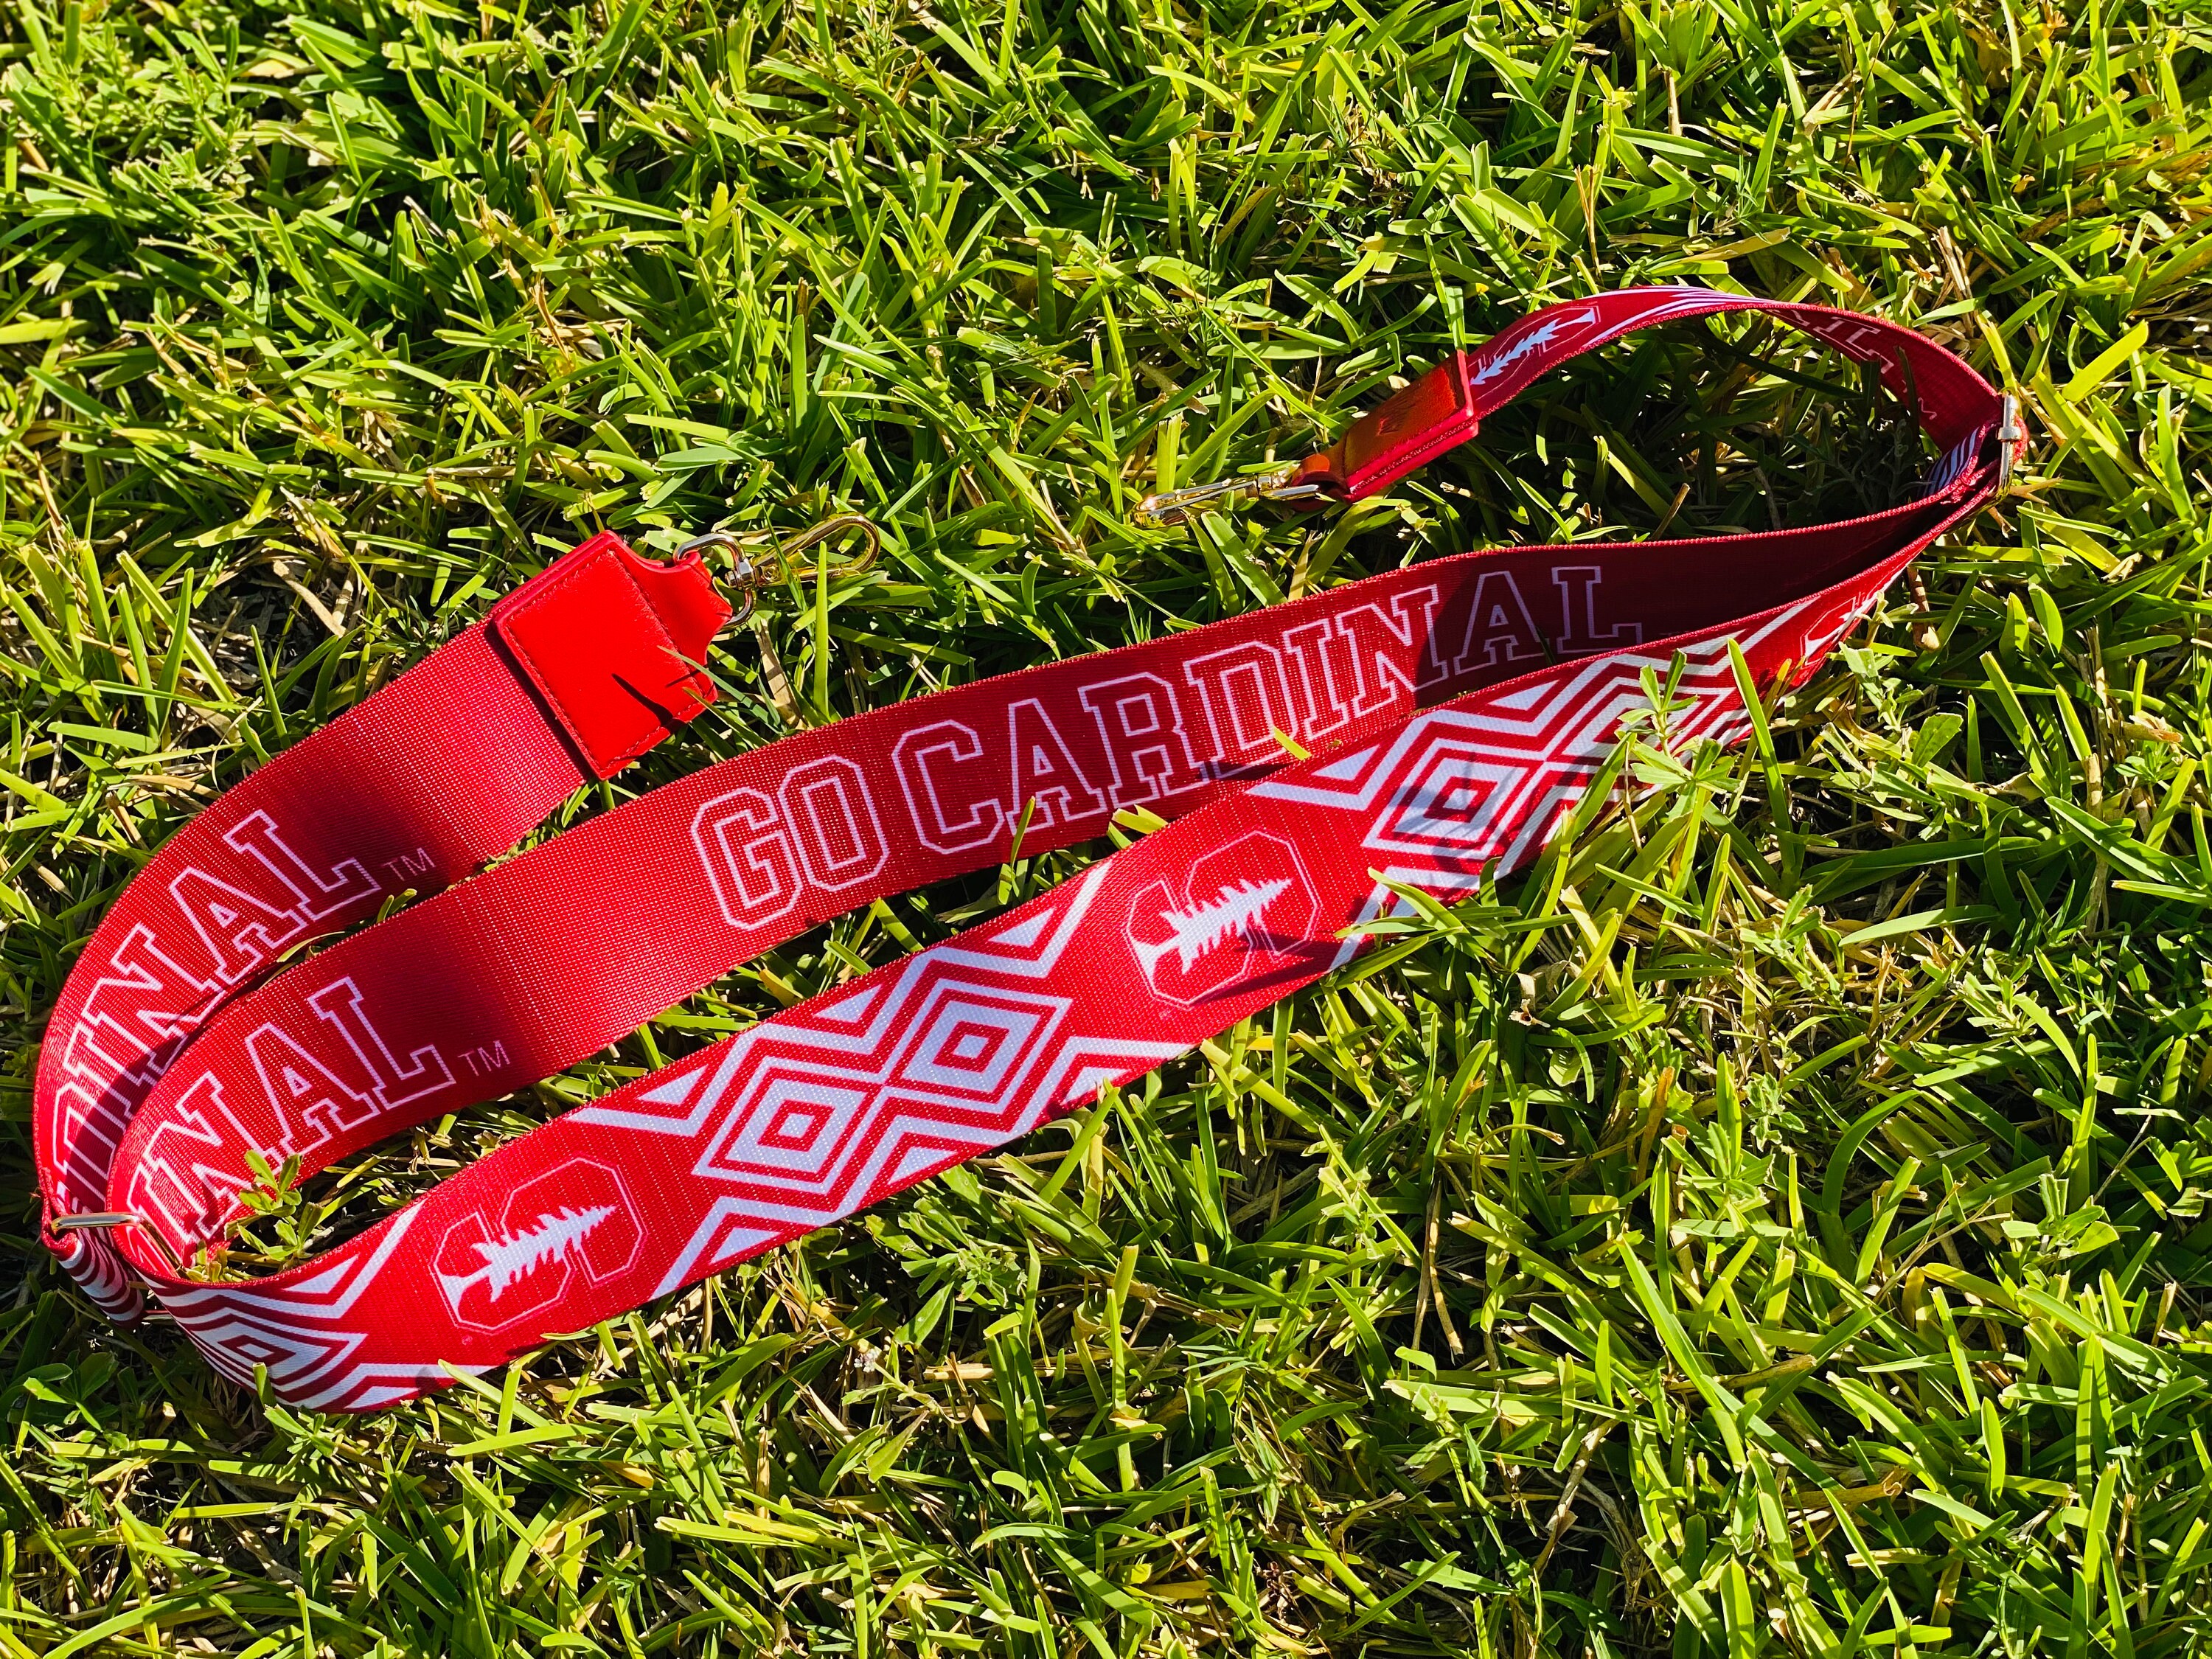 ST. LOUIS CARDINALS LANYARD WITH DETACHABLE BUCKLE! RED BLUE NICE GO CARDS!